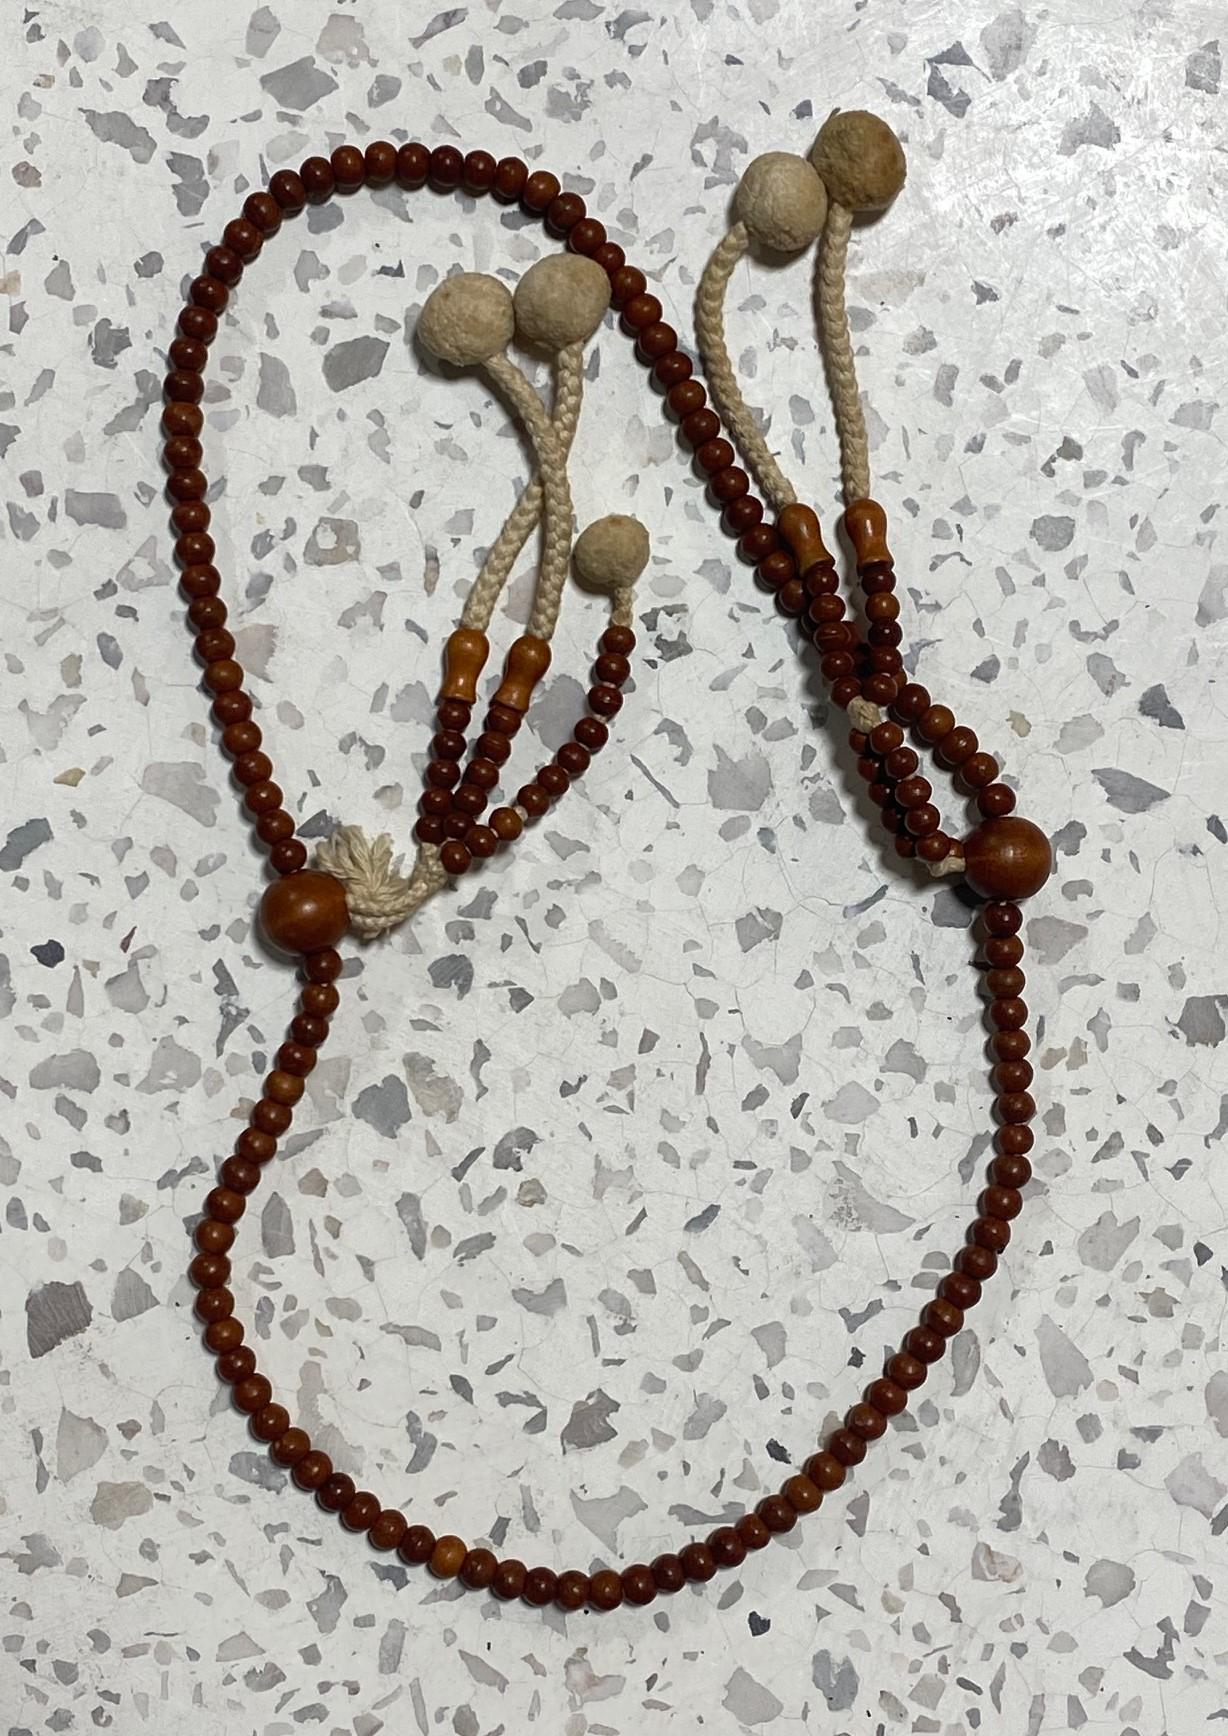 A beautiful string of Japanese hand-crafted Buddhist Juzu mala beads made of natural wood. These rosary-type prayer bead necklaces were used by Buddhist monks in temple prayers/rituals and worn by Samurai as amulets of protection.  This type of Juzu